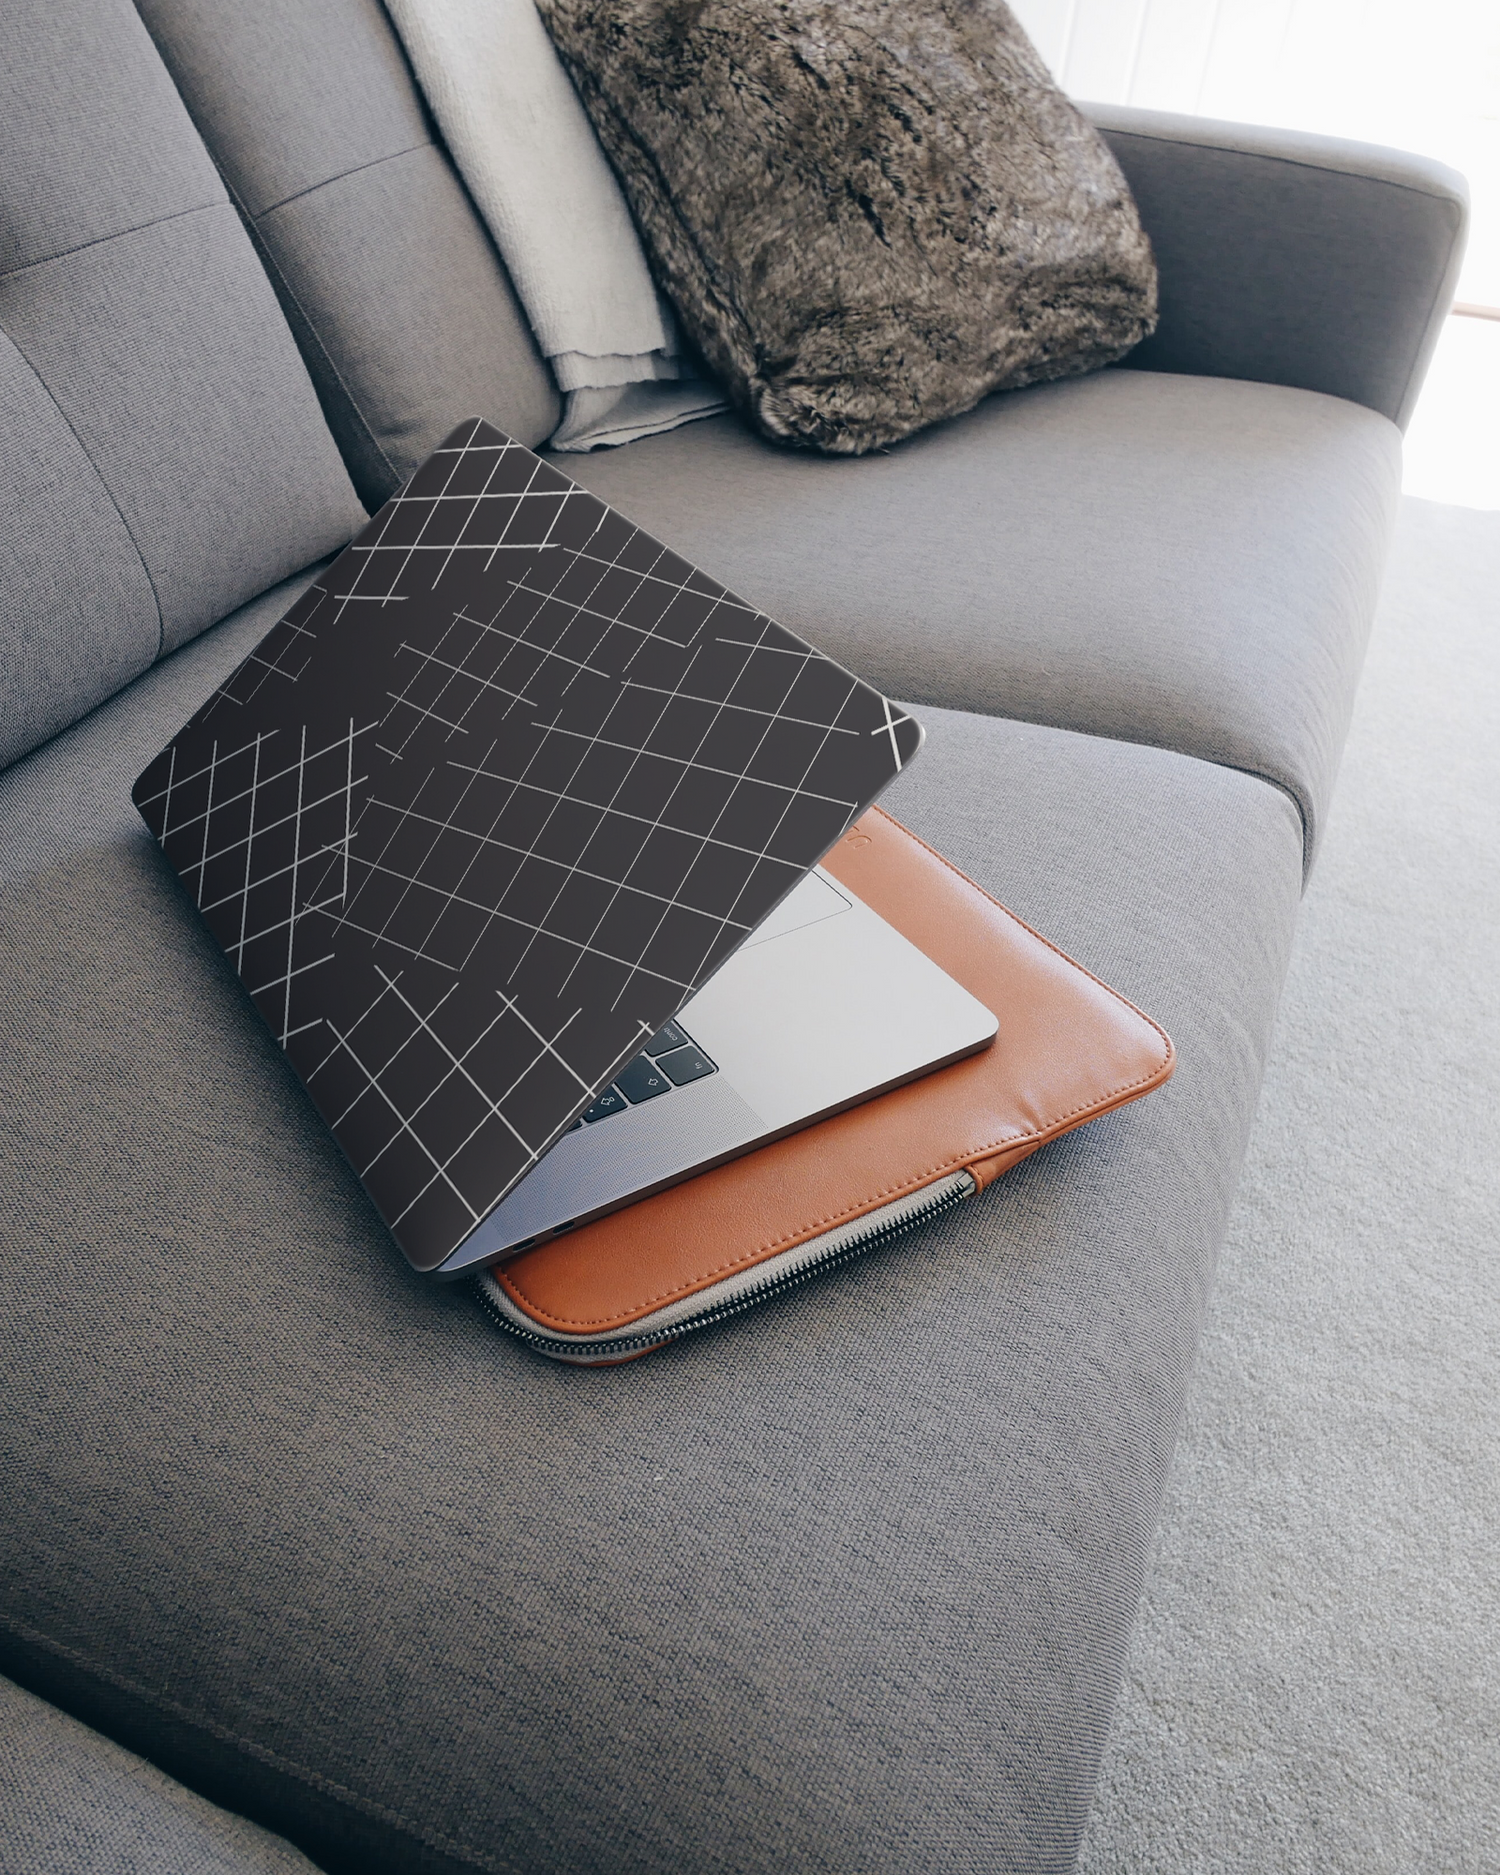 Grids Laptop Skin for 15 inch Apple MacBooks on a couch